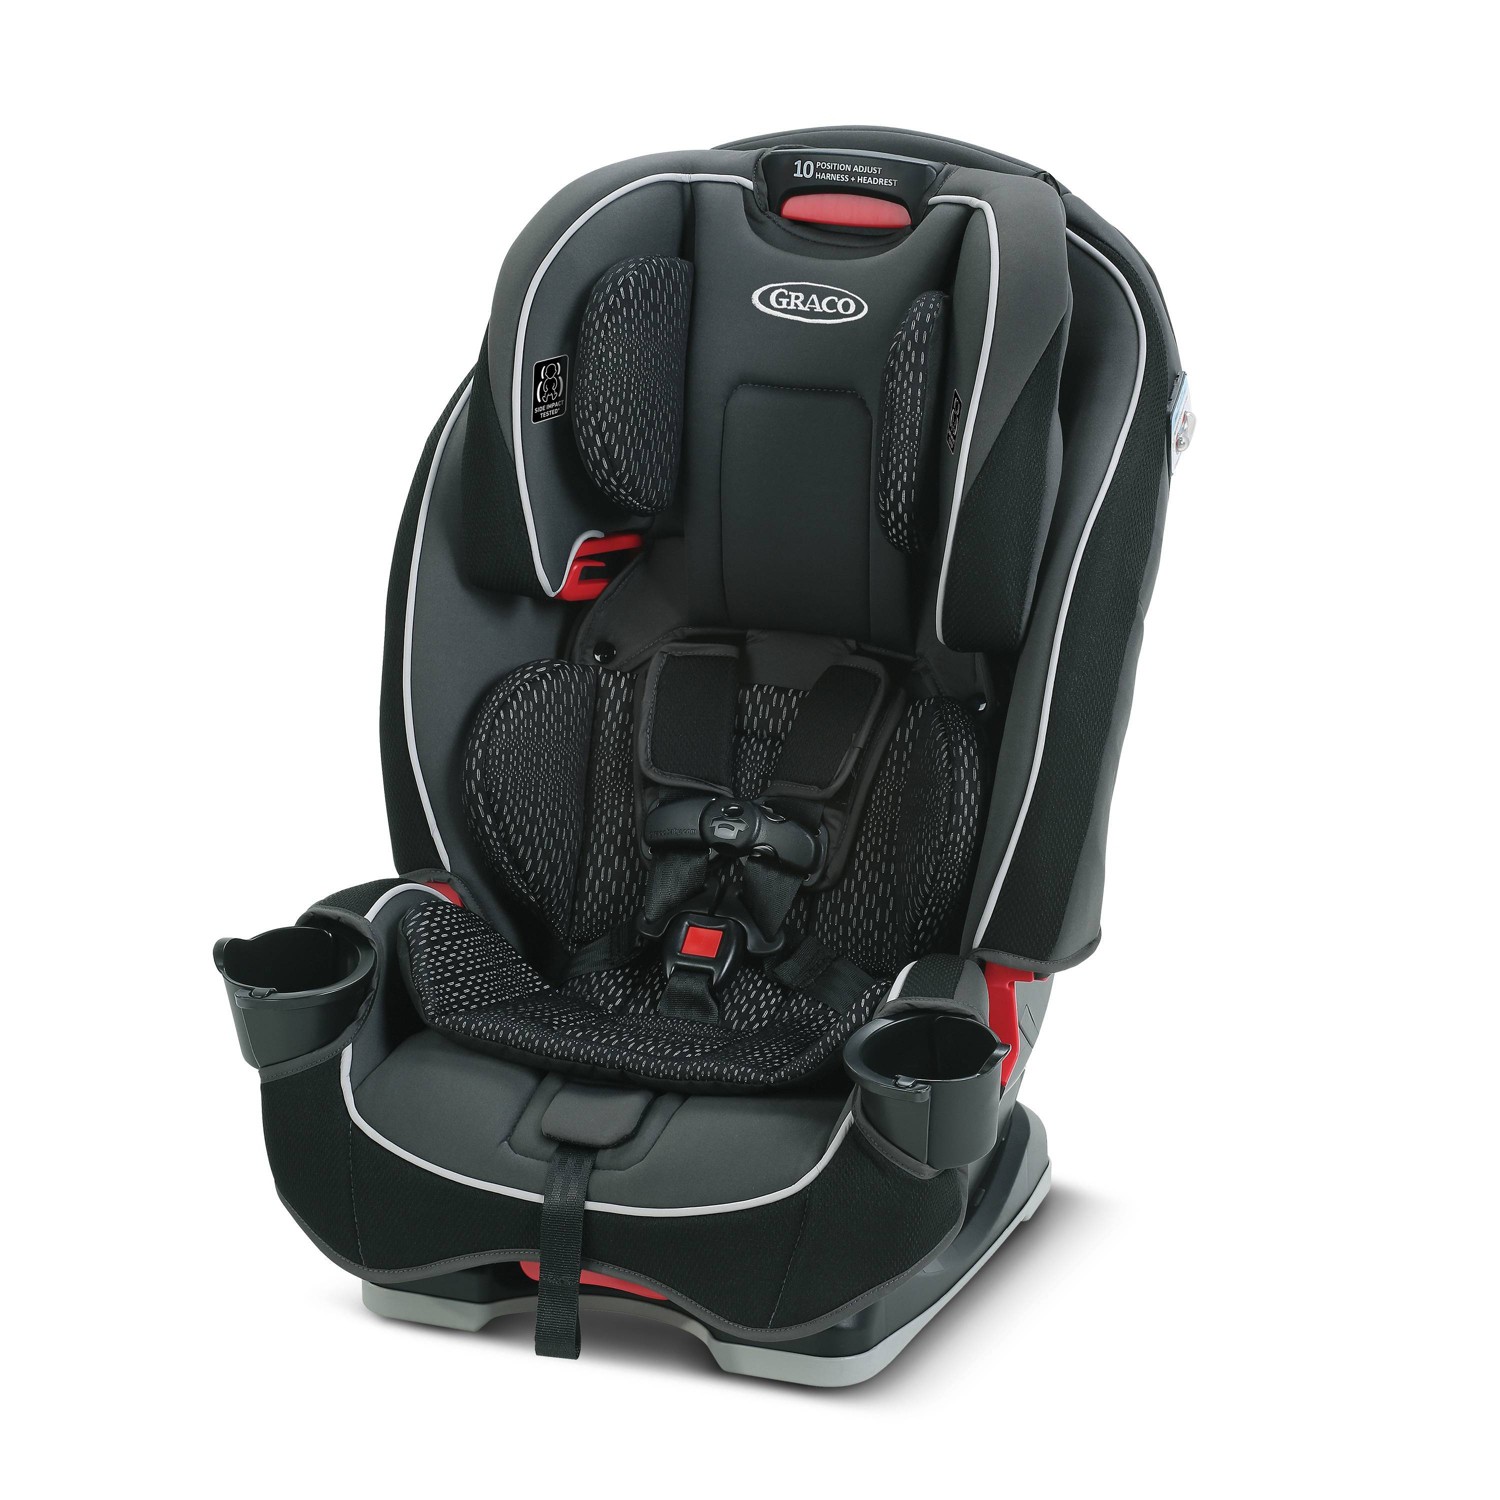 Graco Slim Fit 3-in-1 Convertible Car Seat - Camelot - $107.79